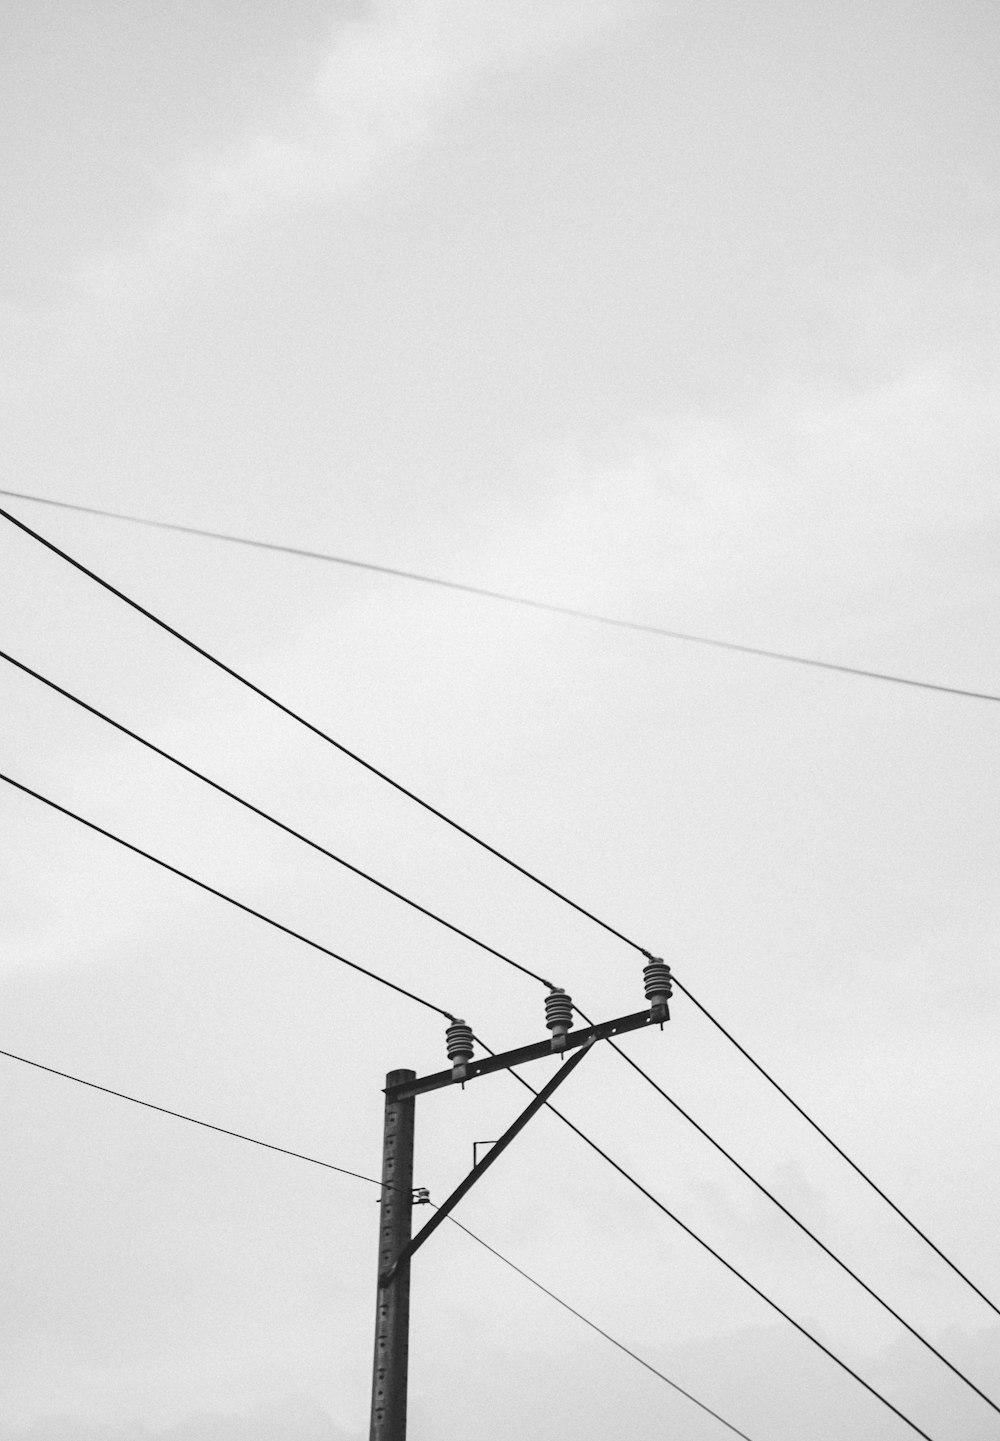 black electric wires under white sky